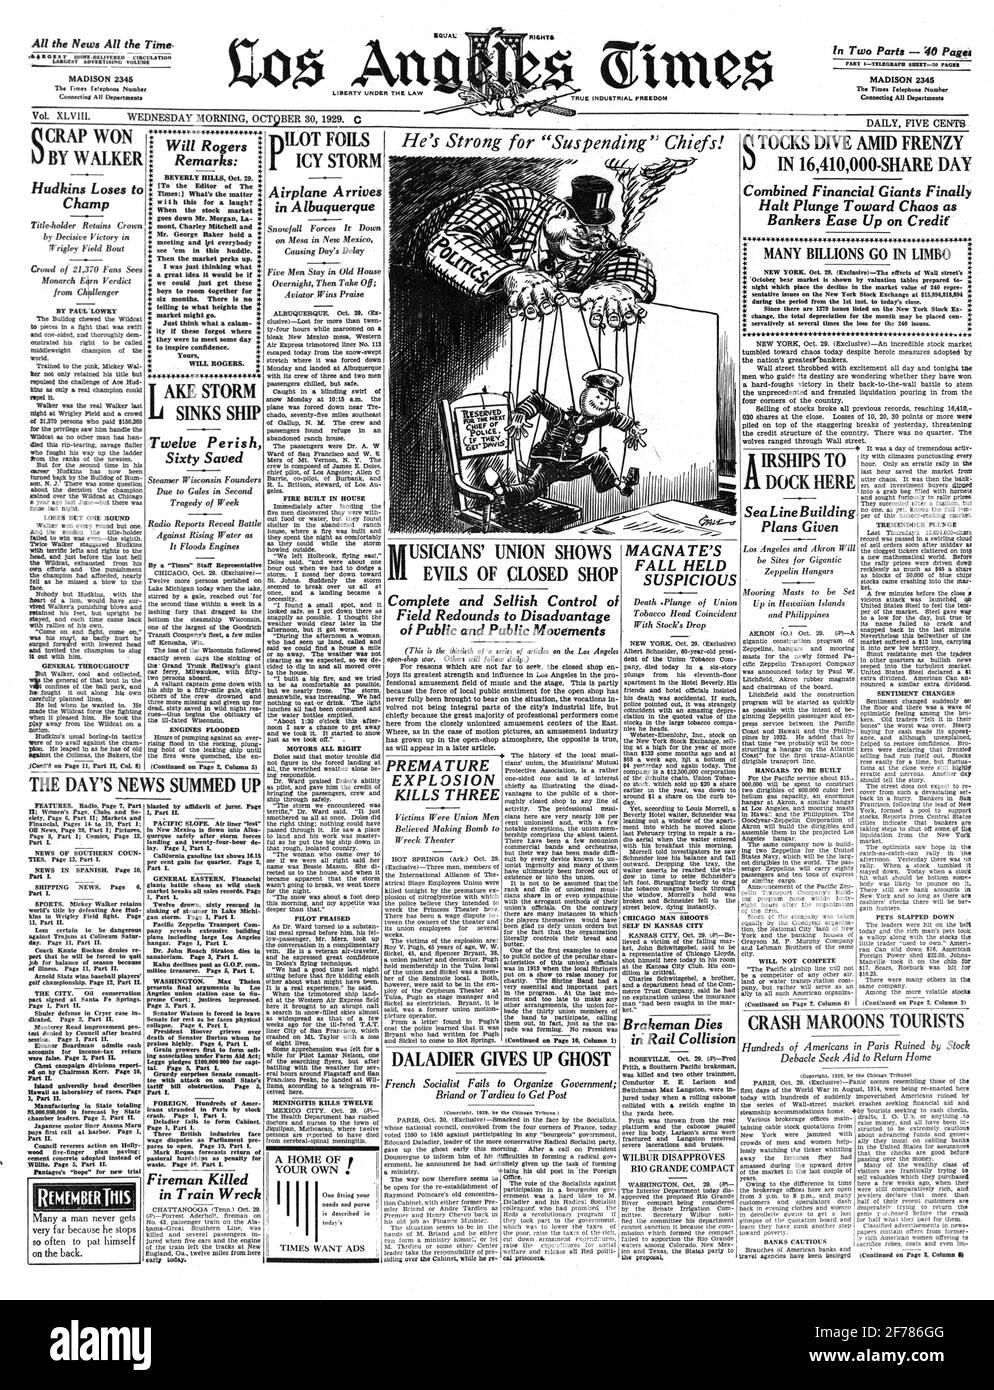 1920s THE LOS ANGELES TIMES NEWSPAPER OCTOBER 30 1929 HEADLINE STOCKS DIVE AMID FRENZY IN 16410000 SHARE DAY CA USA - asp h1080 ASP001 HARS OLD FASHIONED Stock Photo